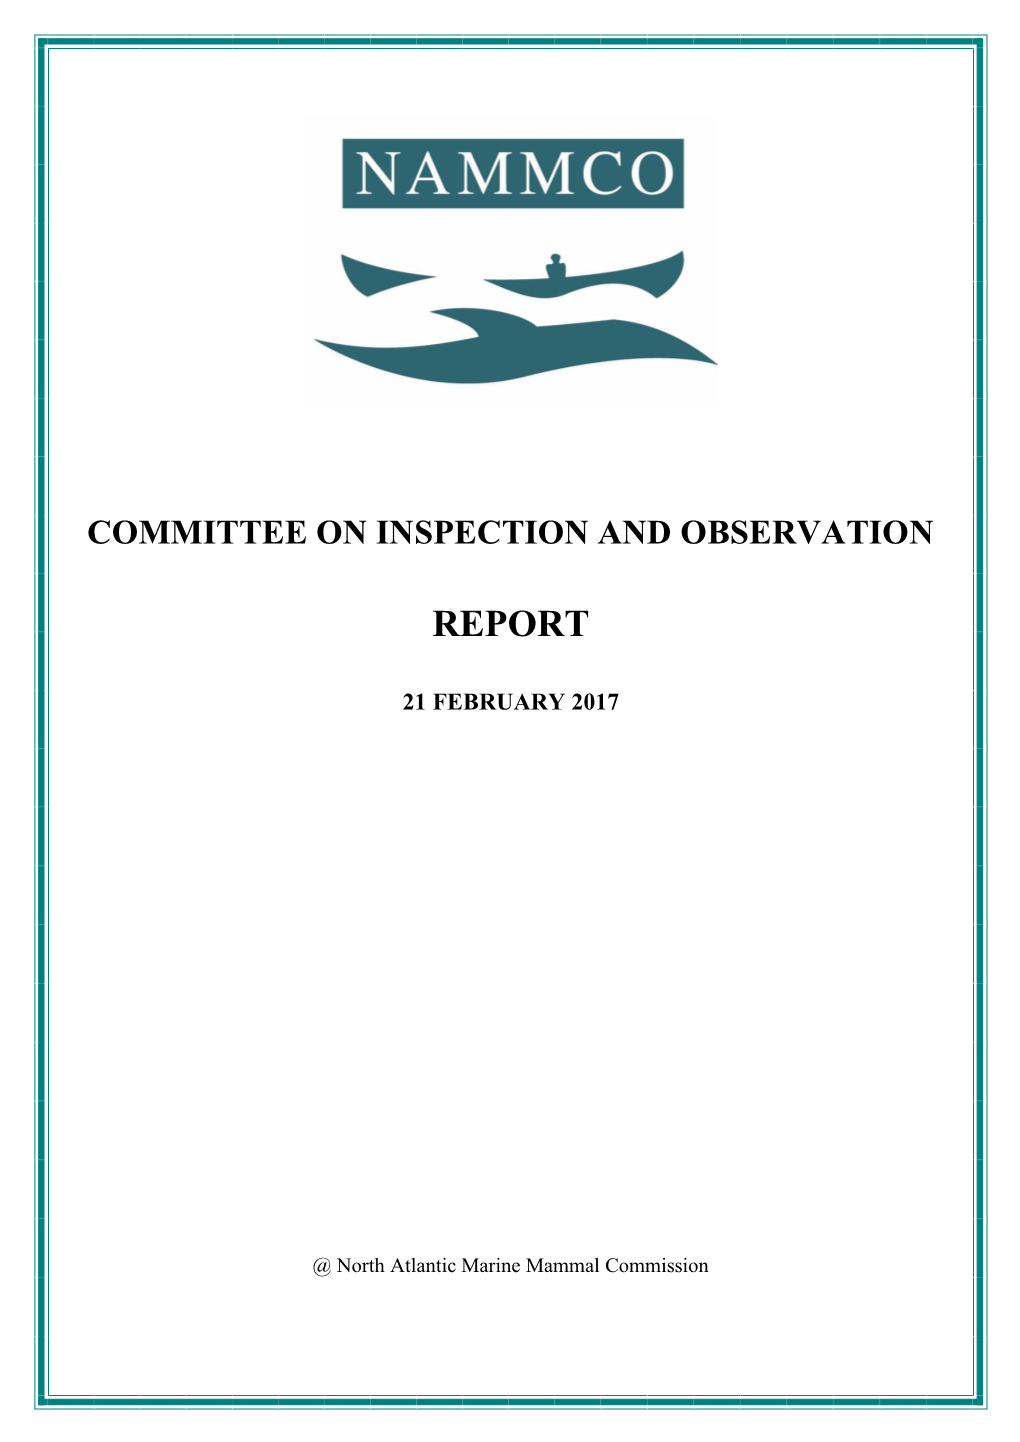 Committee on Inspection and Observation Report